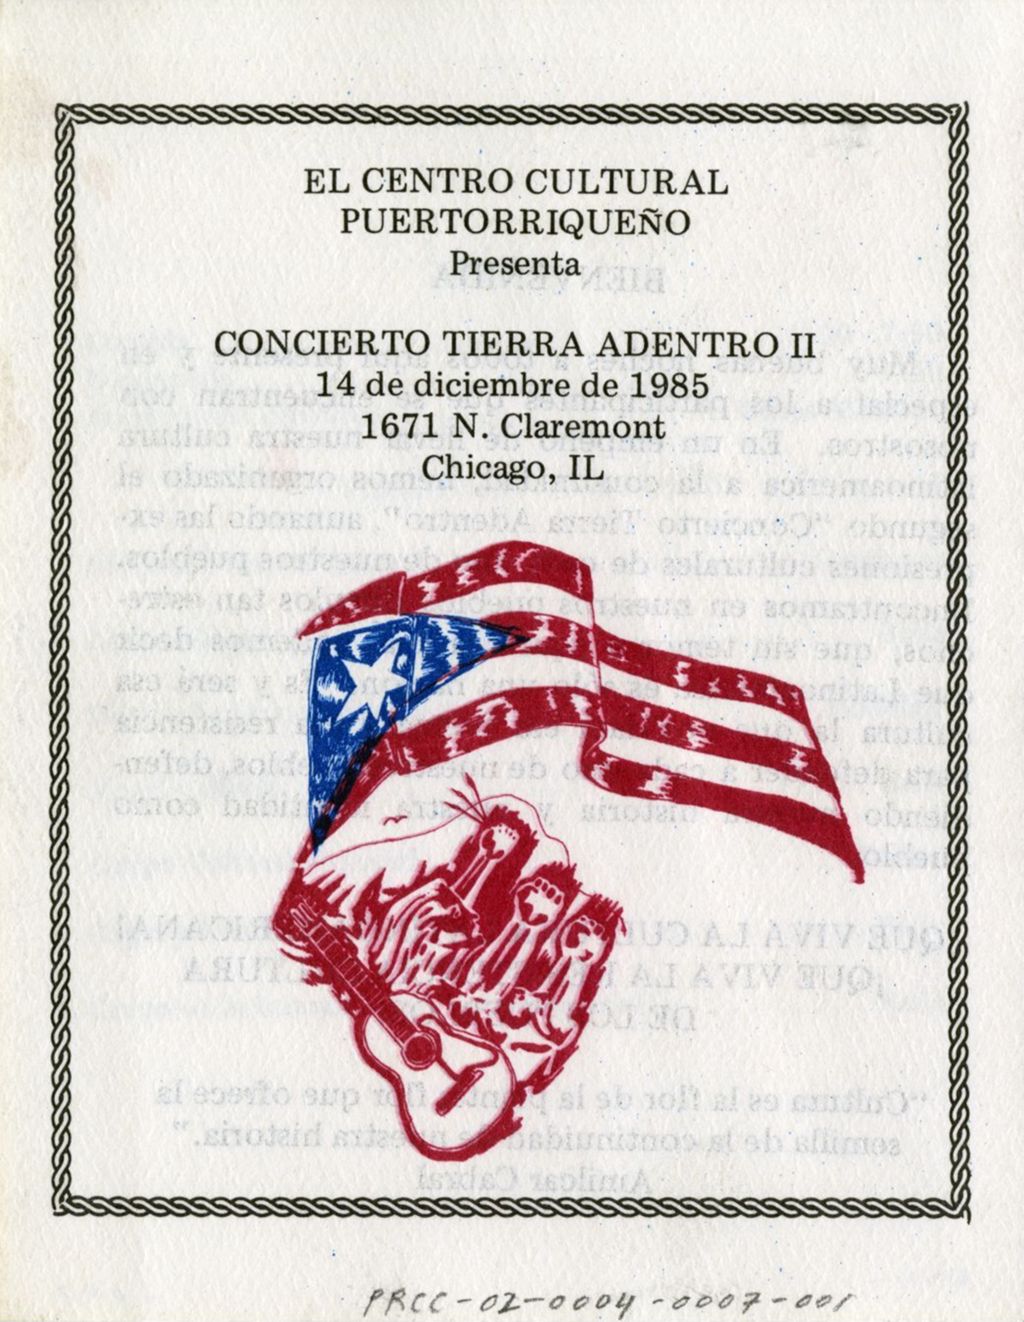 Concert at the Puerto Rican Cultural Center